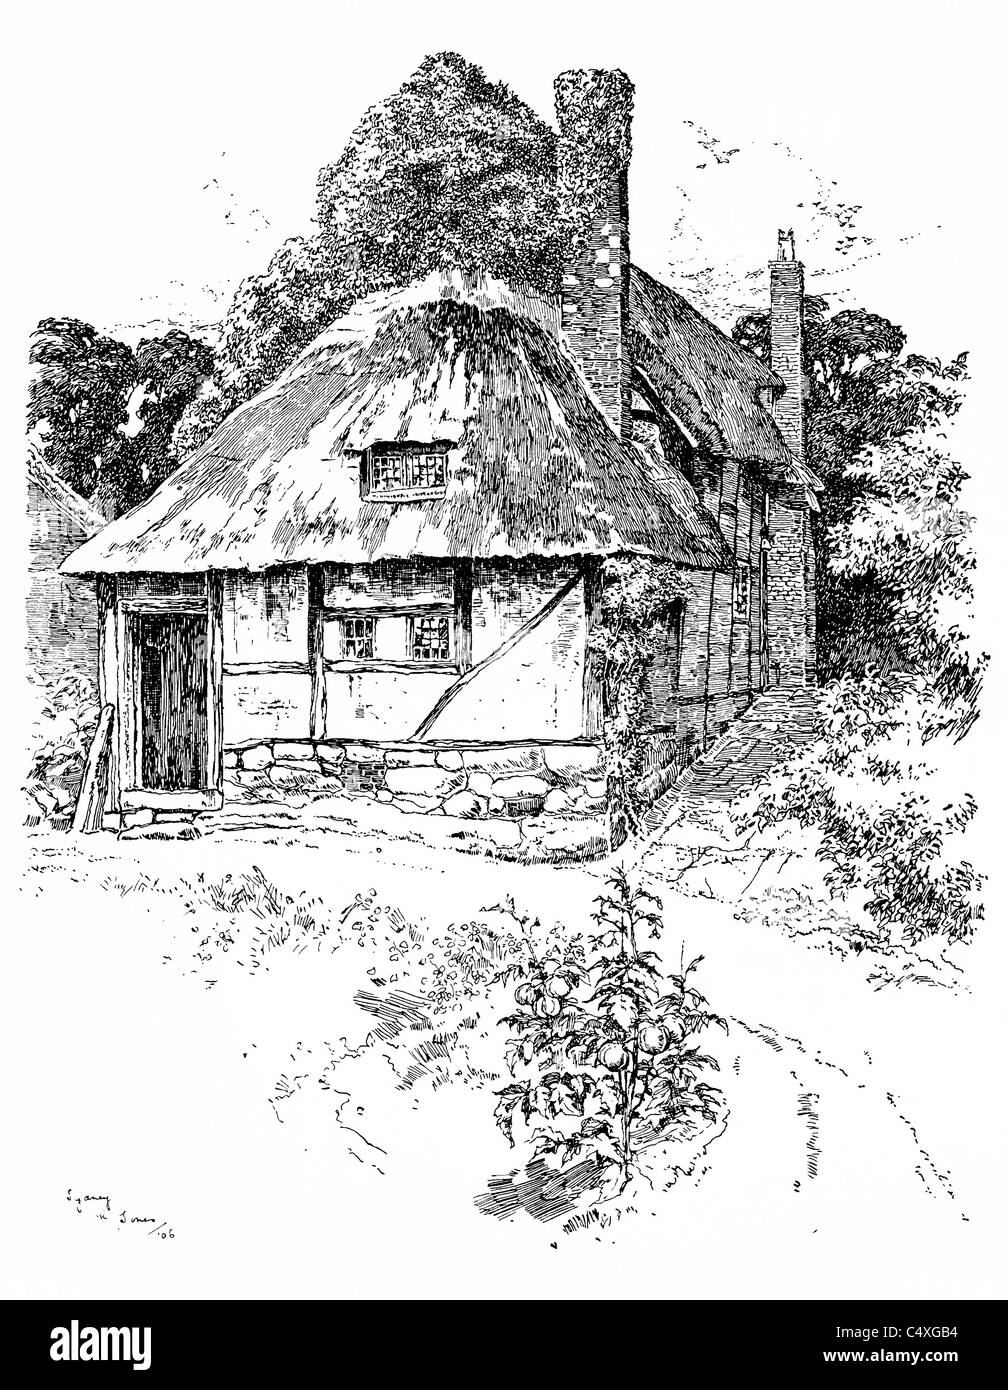 Leek Wootton, Warwick - pen and ink illustration from 'Old English Country Cottages' by Charles Holme, 1906. Stock Photo